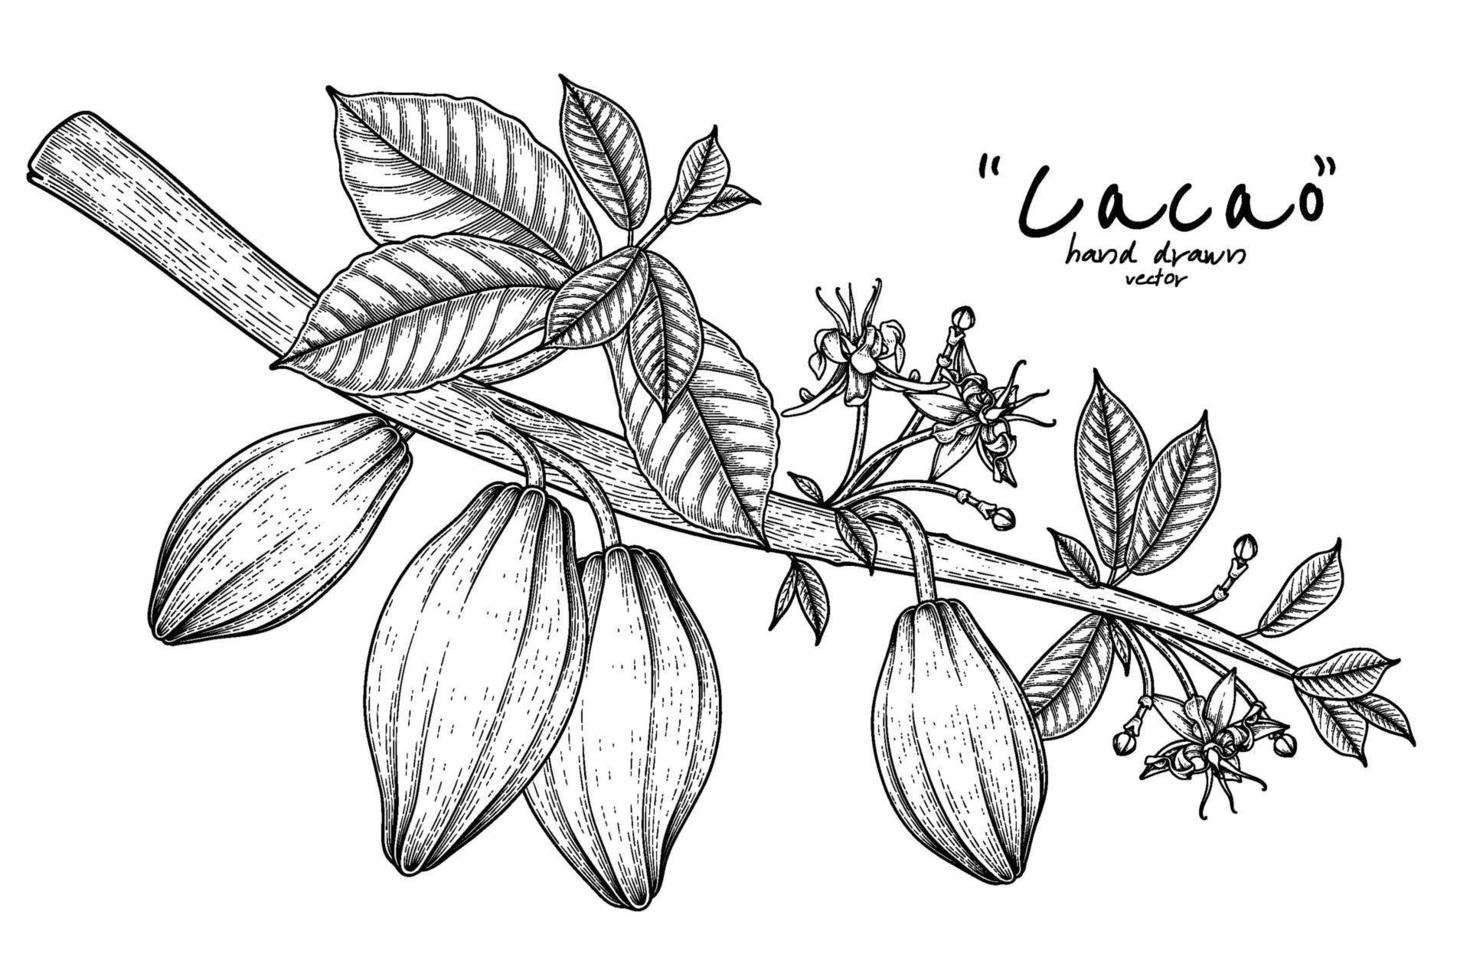 Cacao branch with fruits hand drawn illustration vector